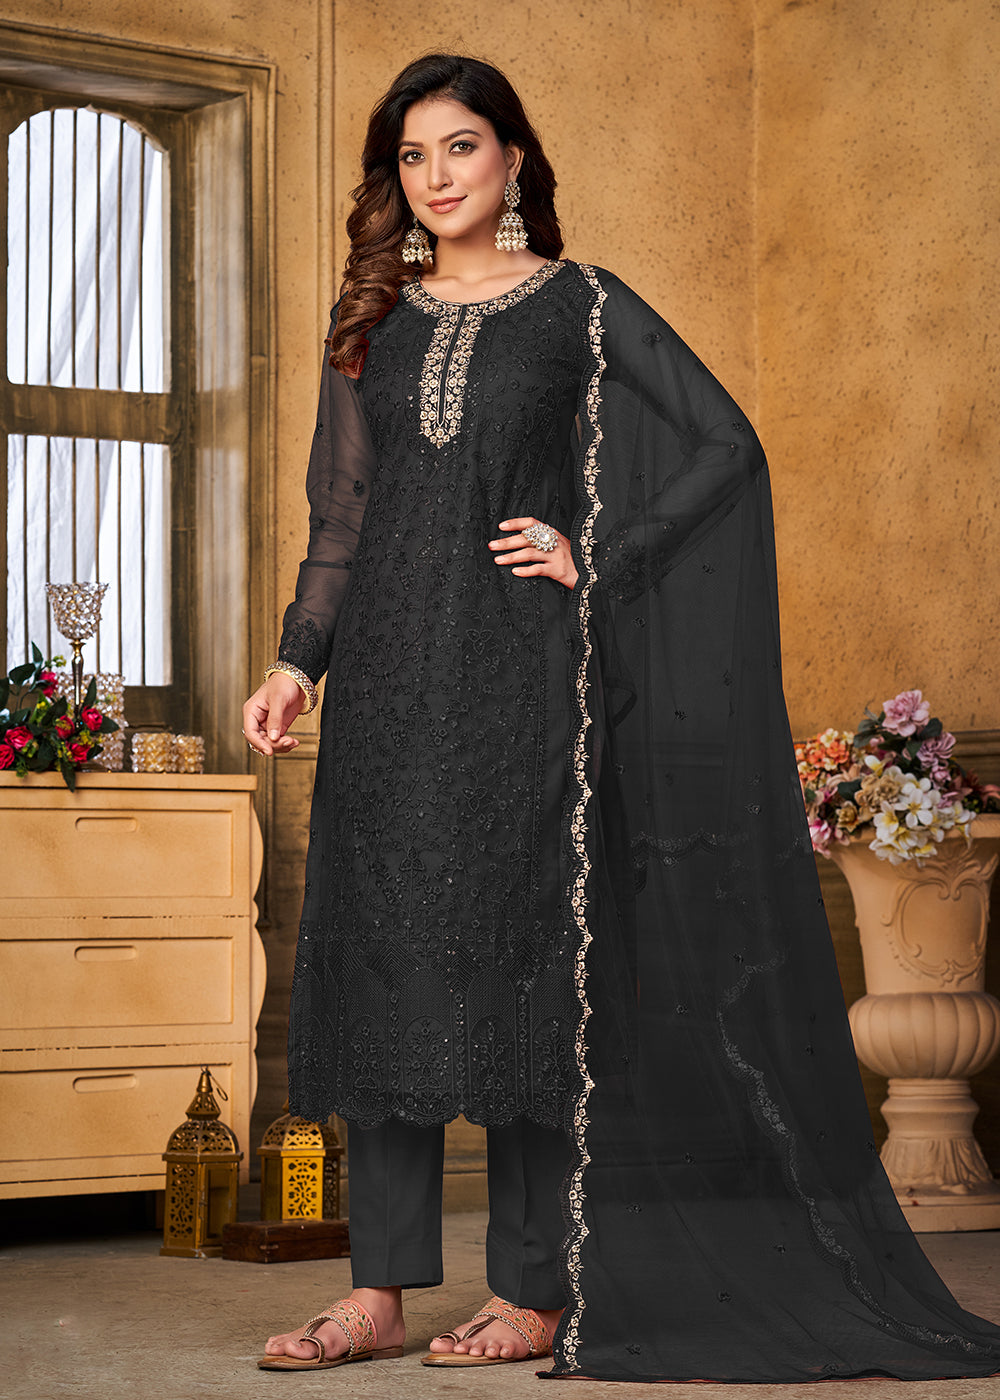 Buy Now Festive Party Black Net Embroidered Trendy Salwar Suit Online in USA, UK, Canada, Germany, Australia & Worldwide at Empress Clothing. 